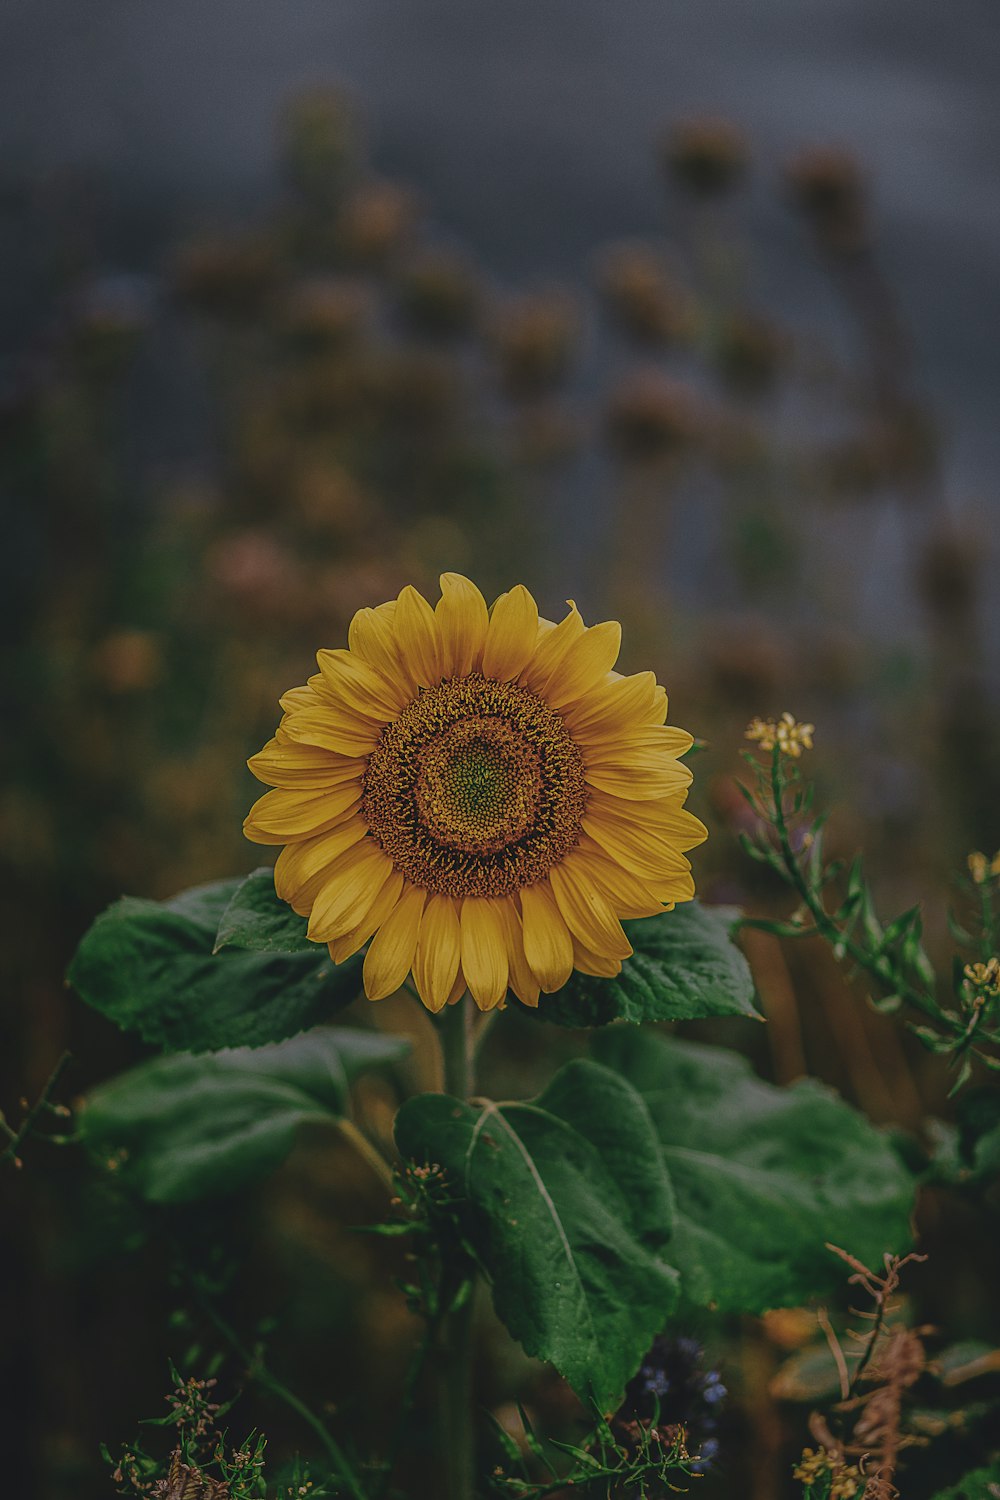 shallow focus photography of sunflower